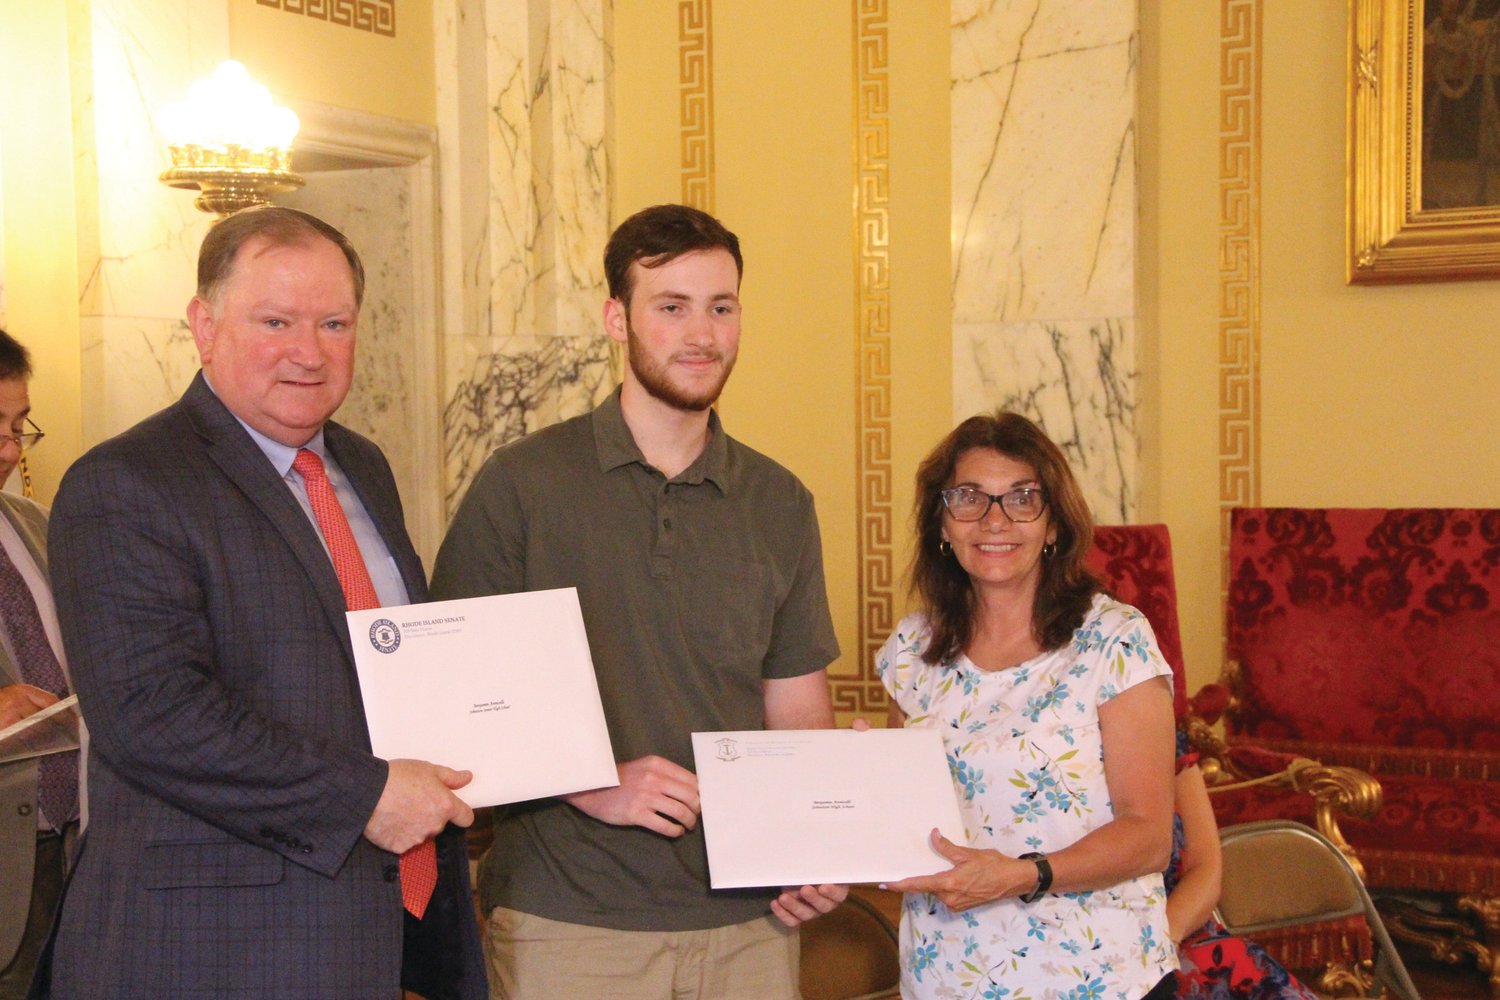 STATE CERTIFIED: Rhode Island state Senate Majority Leader Michael J. McCaffrey (D-Dist. 29, Warwick) and state Rep. Deborah A. Fellela (D-District 43, Johnston) presented citations to outstanding Academic Decathlon competitors from Johnston at a recent State House ceremony. Benjamin Annicelli accepted a citation.